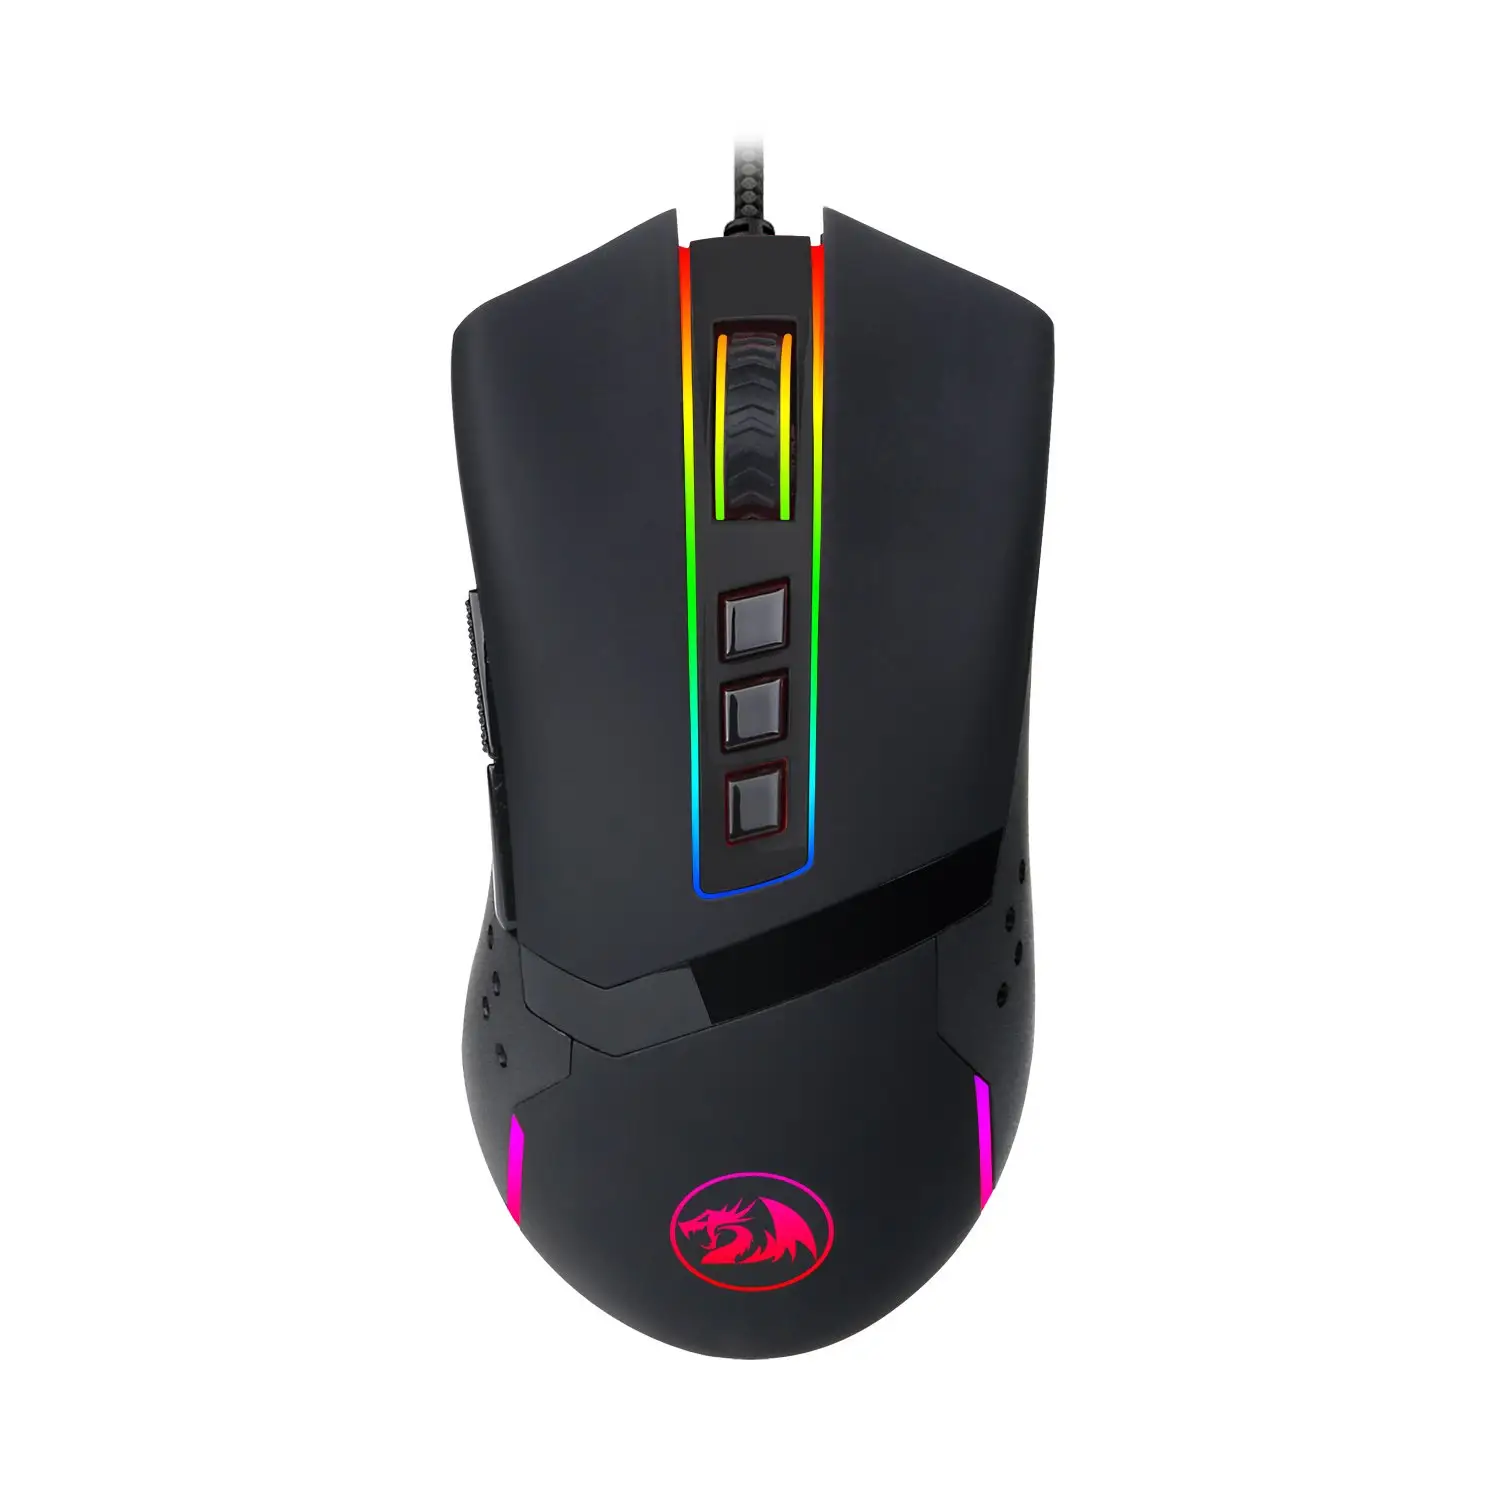 Hot Product Red Dragon M712 USB RGB Backllit Mouse Gamer